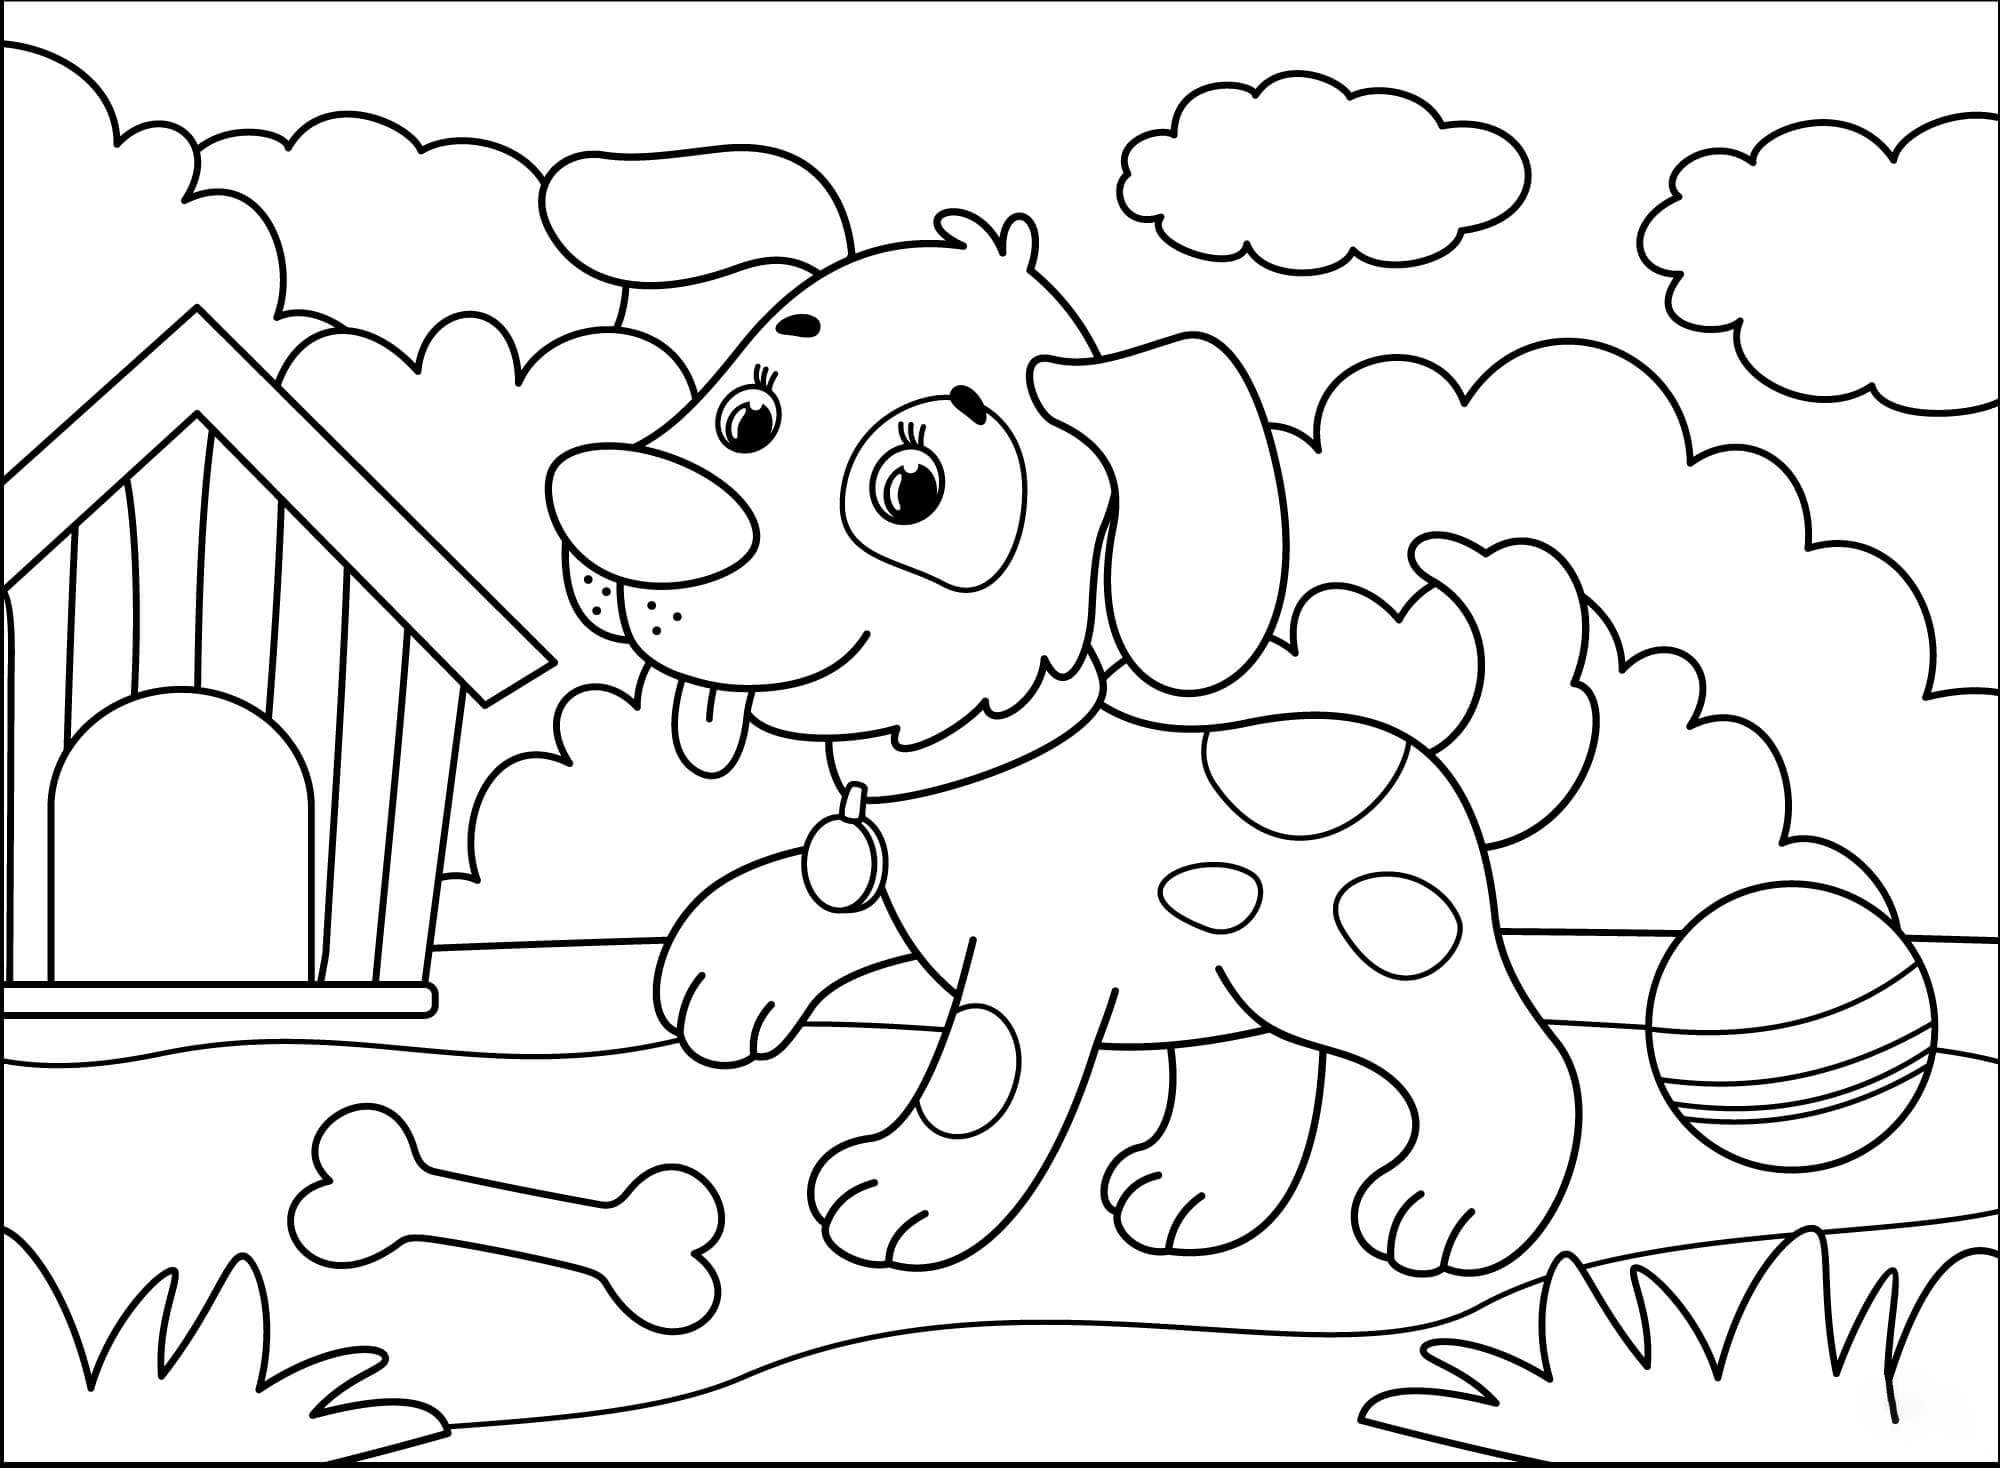 Dog Coloring page from Dogs